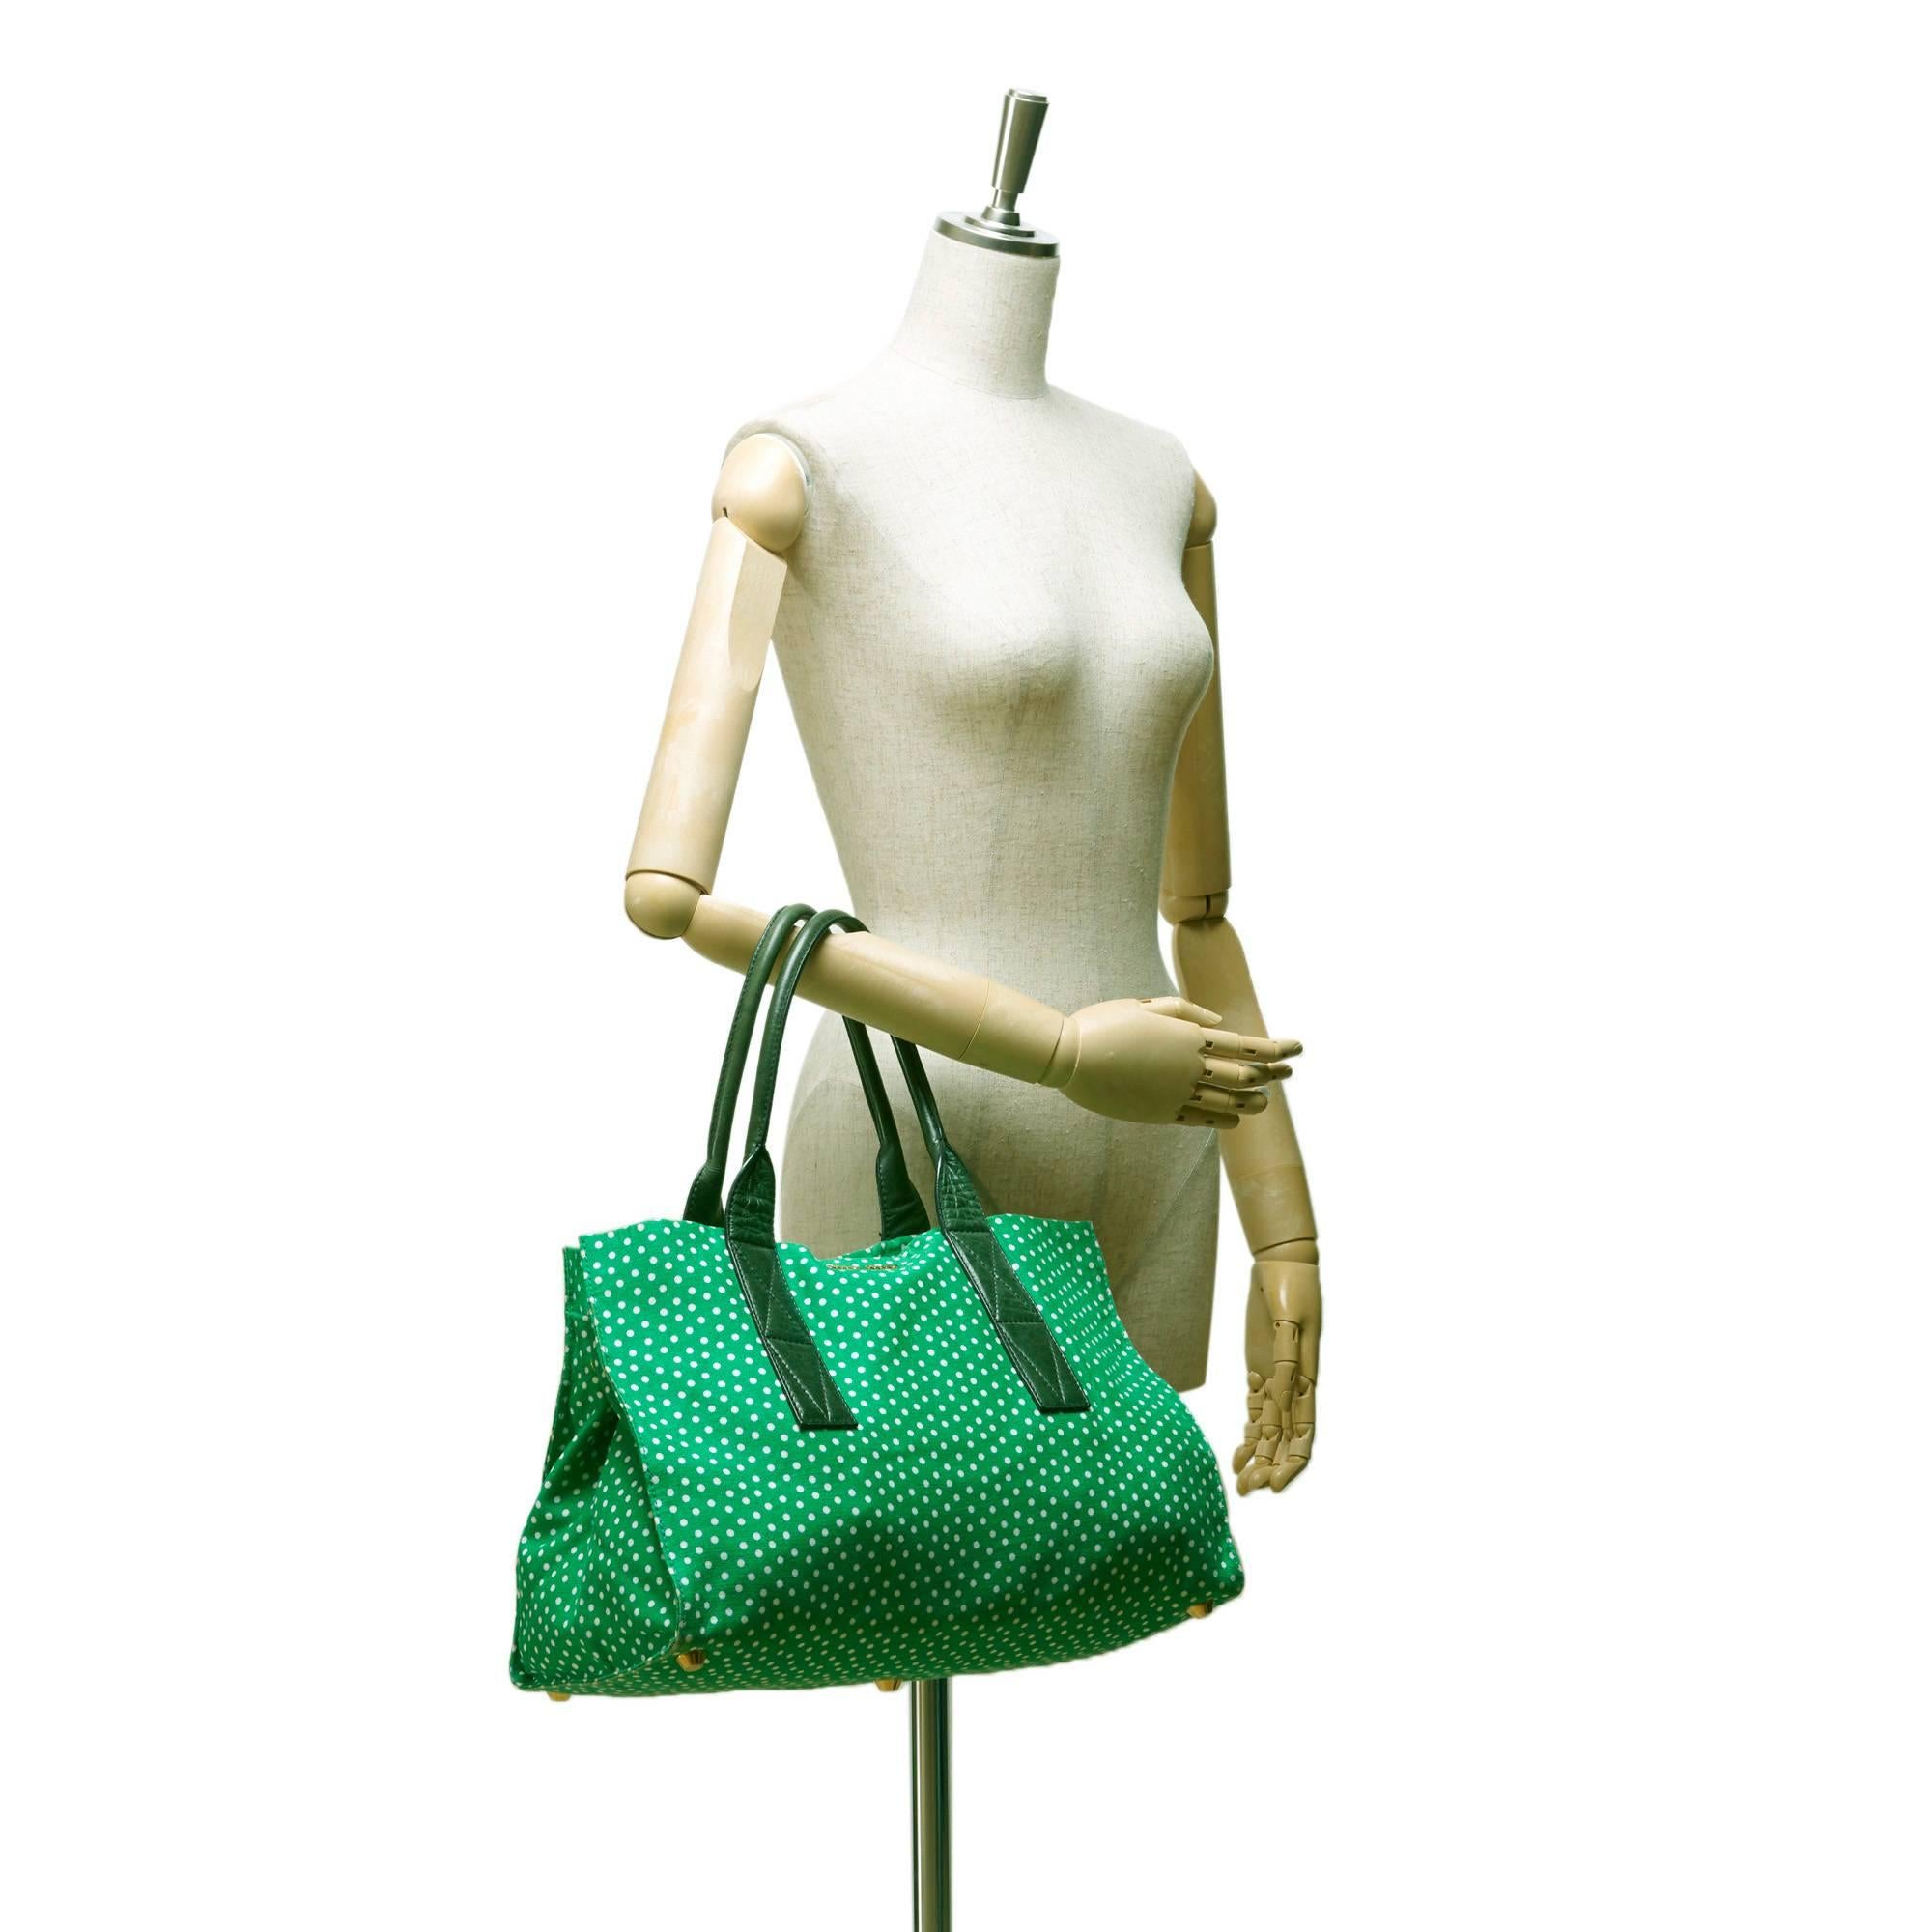 - This Mui Mui white polka dot tote bag features a green canvas body, rolled leather straps, open top with button clasp closure, and interior zip and slip pocket. A very cute bag of Mui Mui! 

- Made in Italy. 

- Size: 39cm x 26cm x 21cm. Shoulder